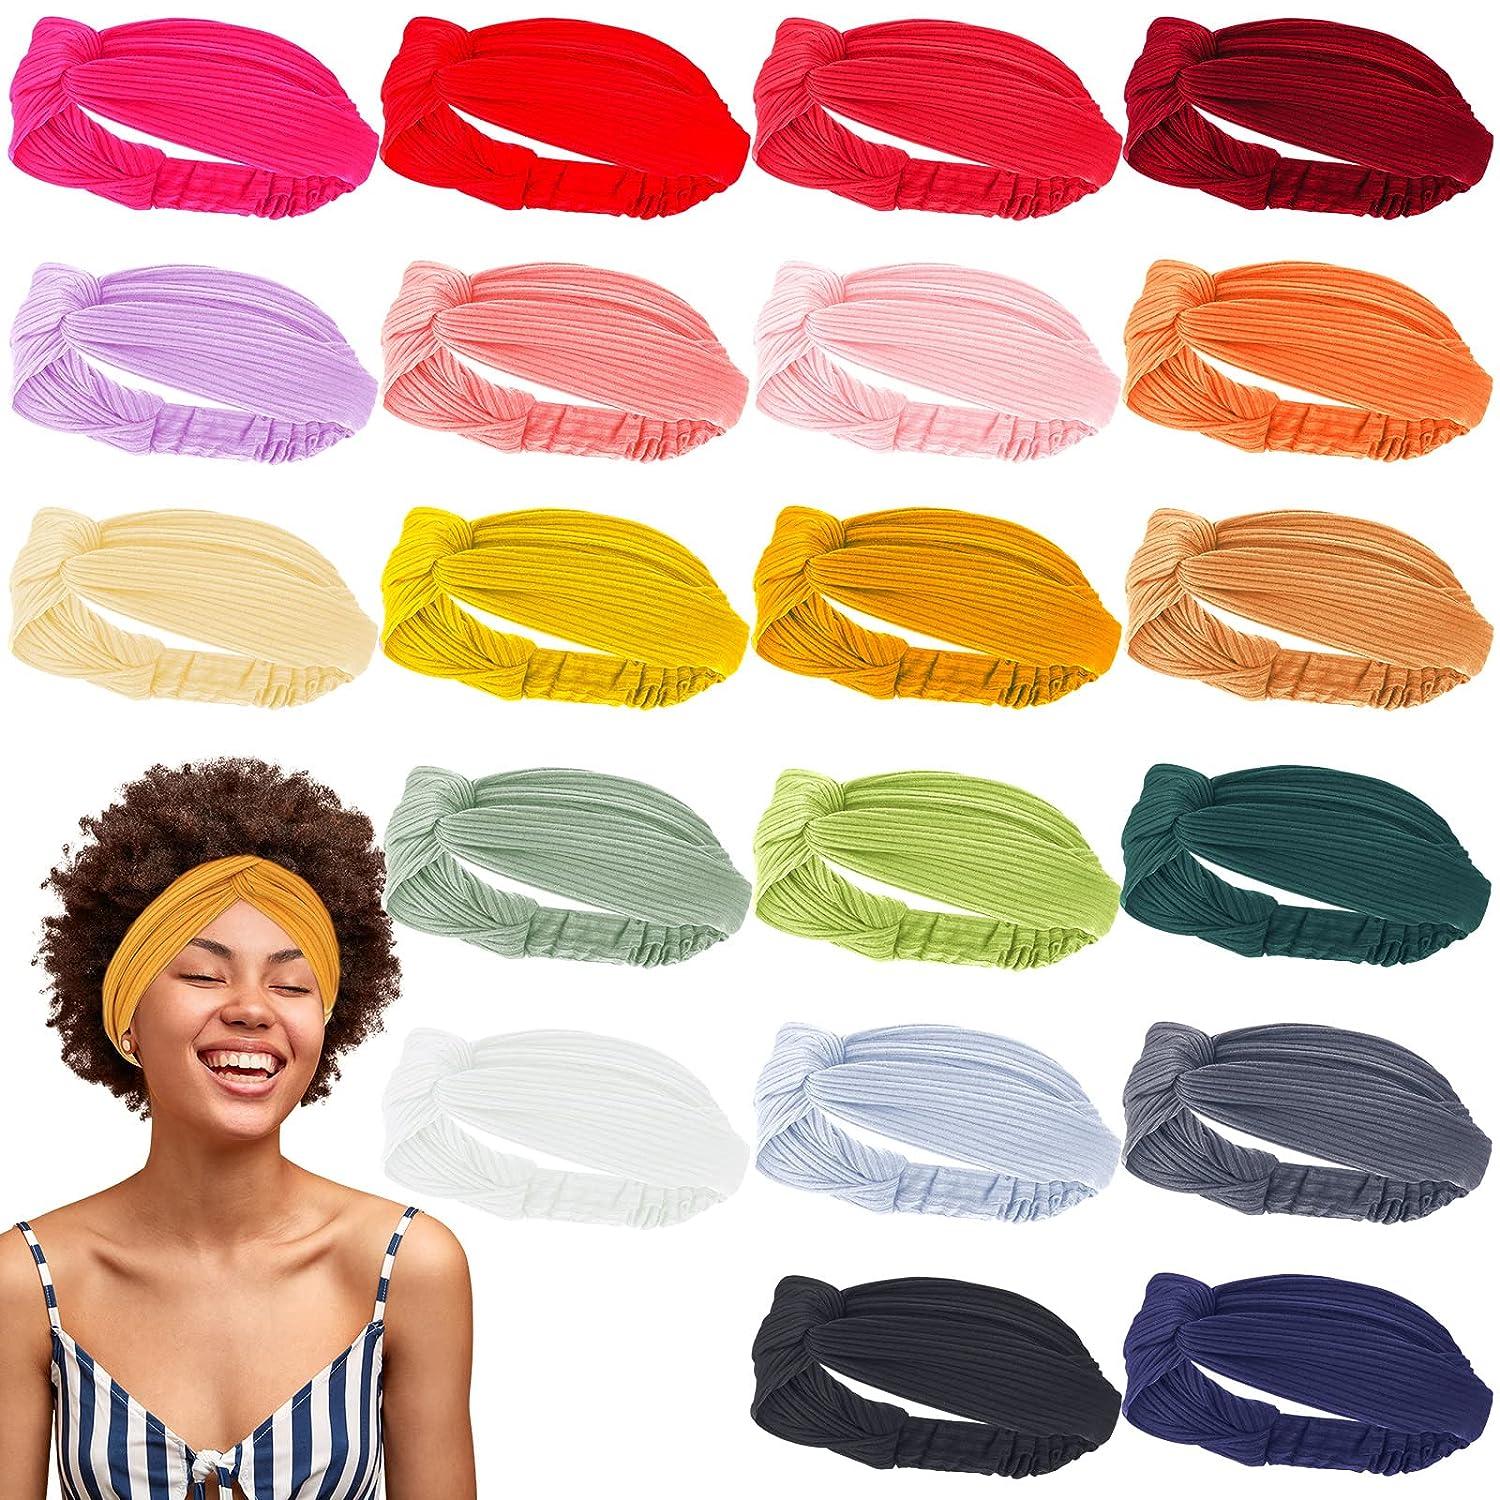 20 Pcs Headbands for Women Twist Knotted Hair Bands Solid Color Stretchy  Head Bands Boho Hair Accessories Vintage Elastic Womens Headbands Criss  Cross